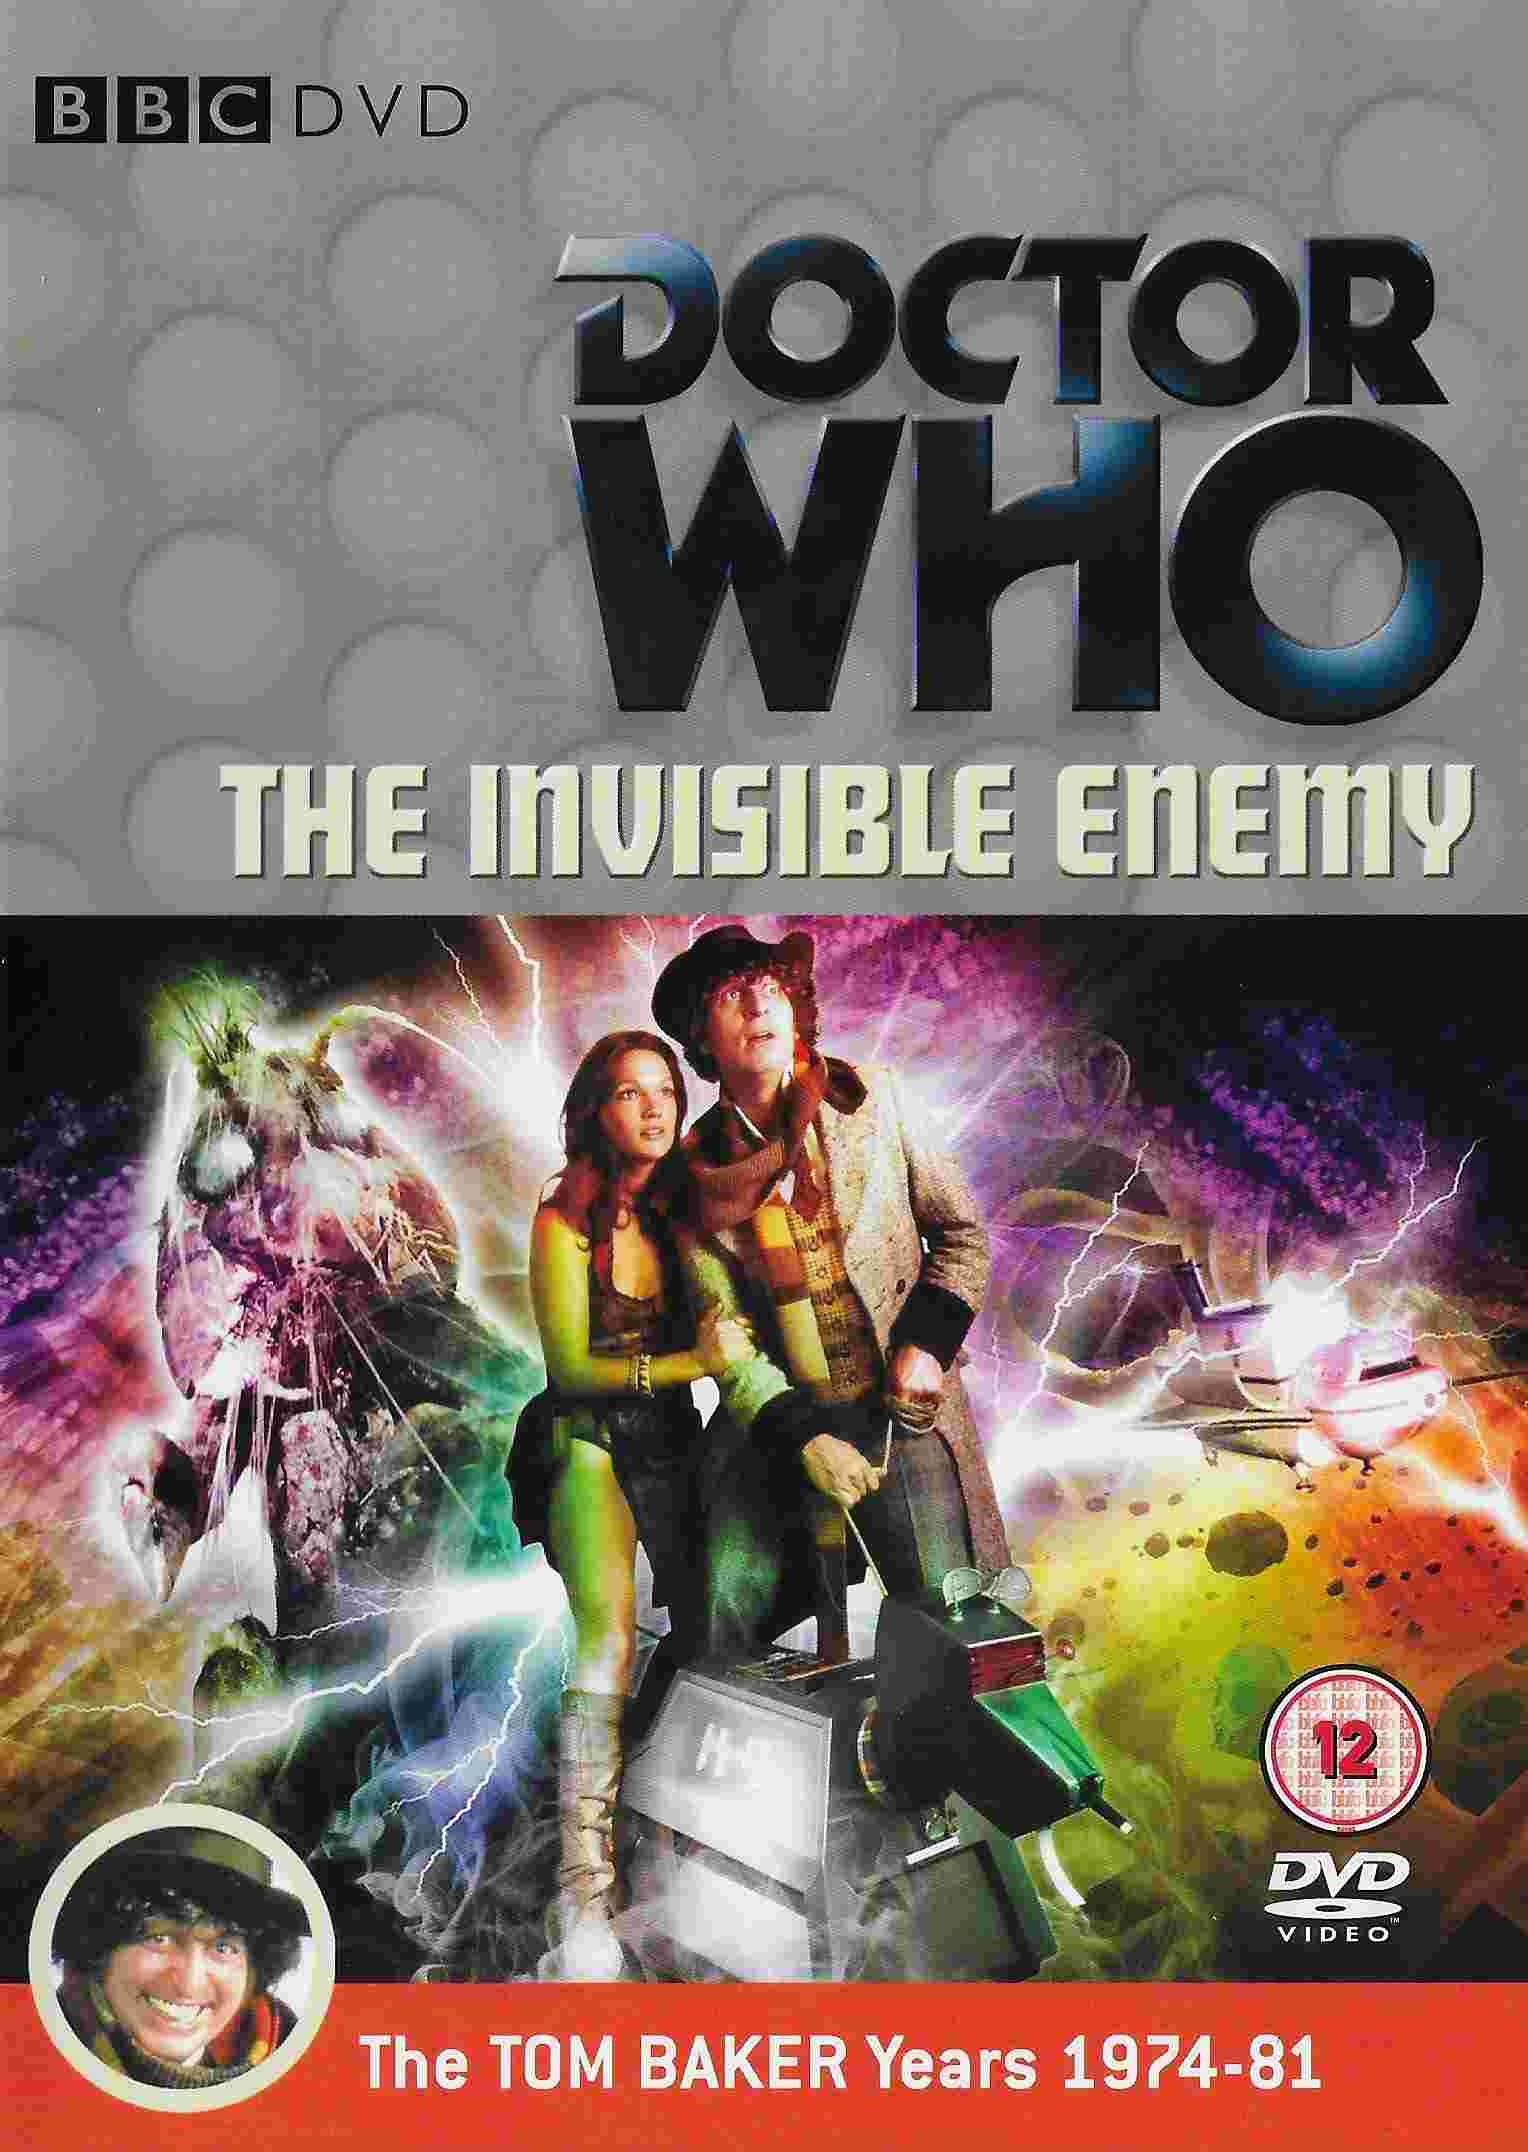 Picture of BBCDVD 2799 Doctor Who - The invisible enemy by artist Bob Baker / Dave Martin from the BBC dvds - Records and Tapes library